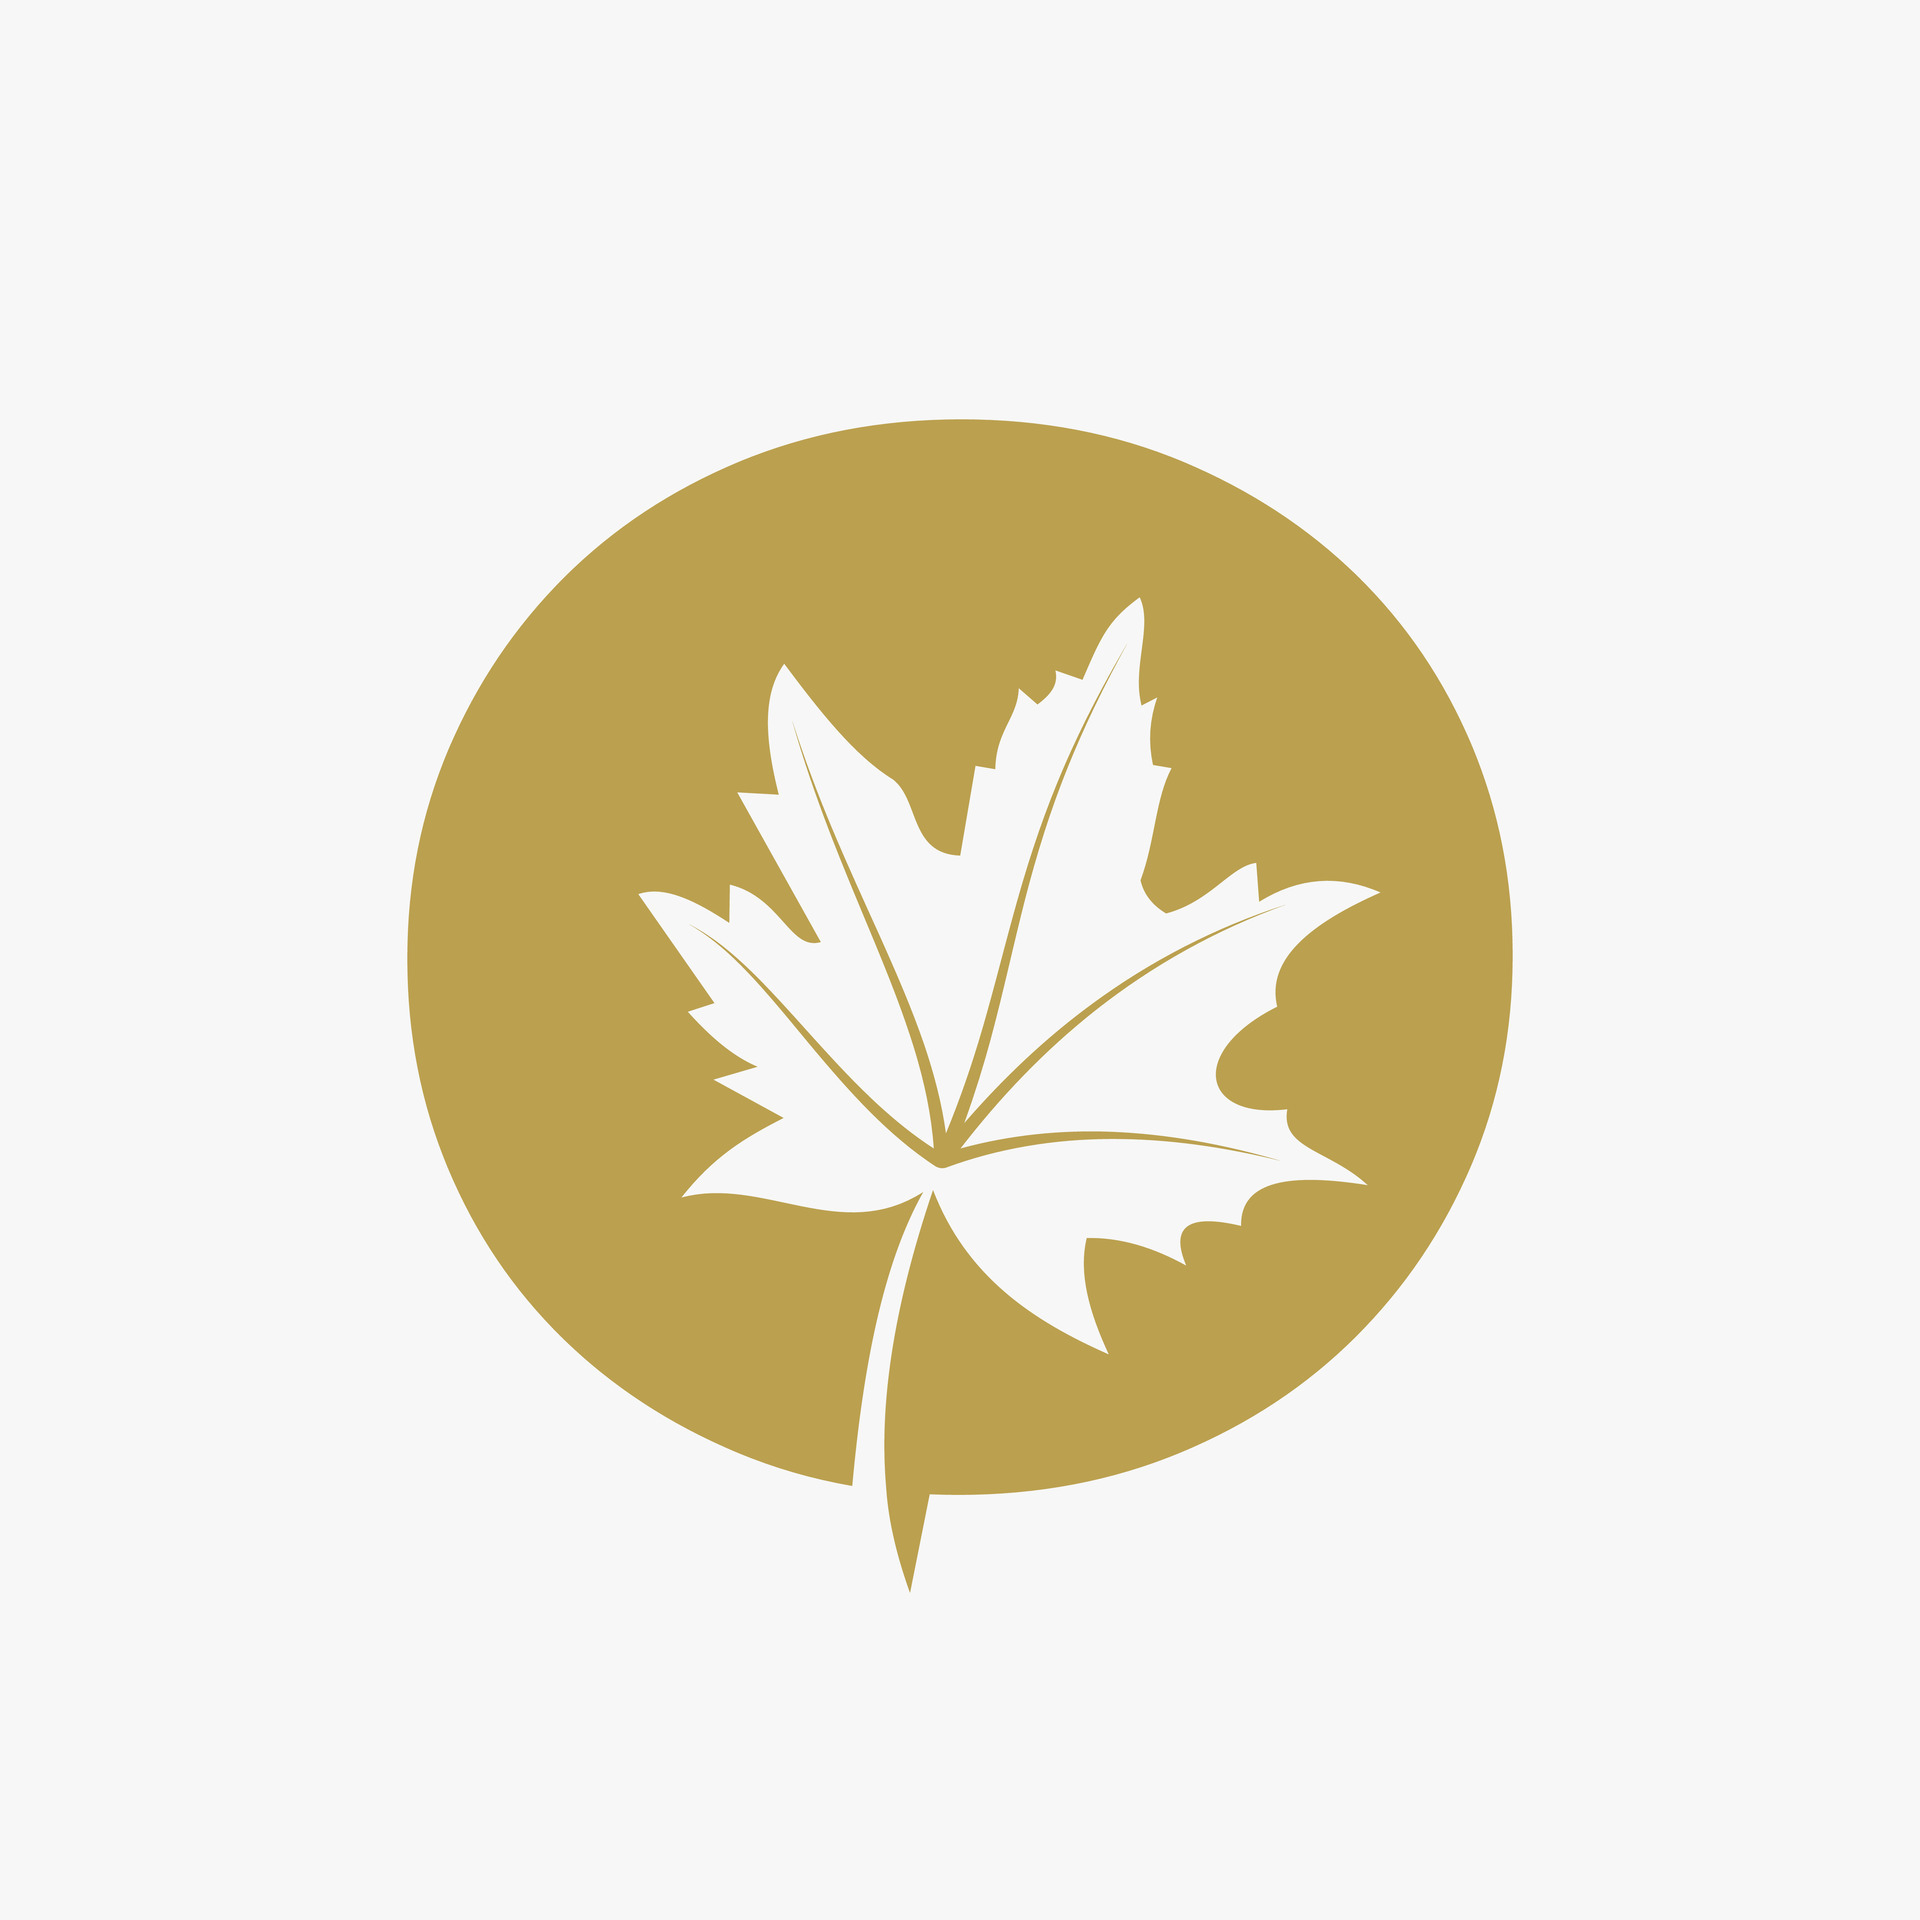 Maple Leaf Vector Symbol With Icon Big Collections. Canada